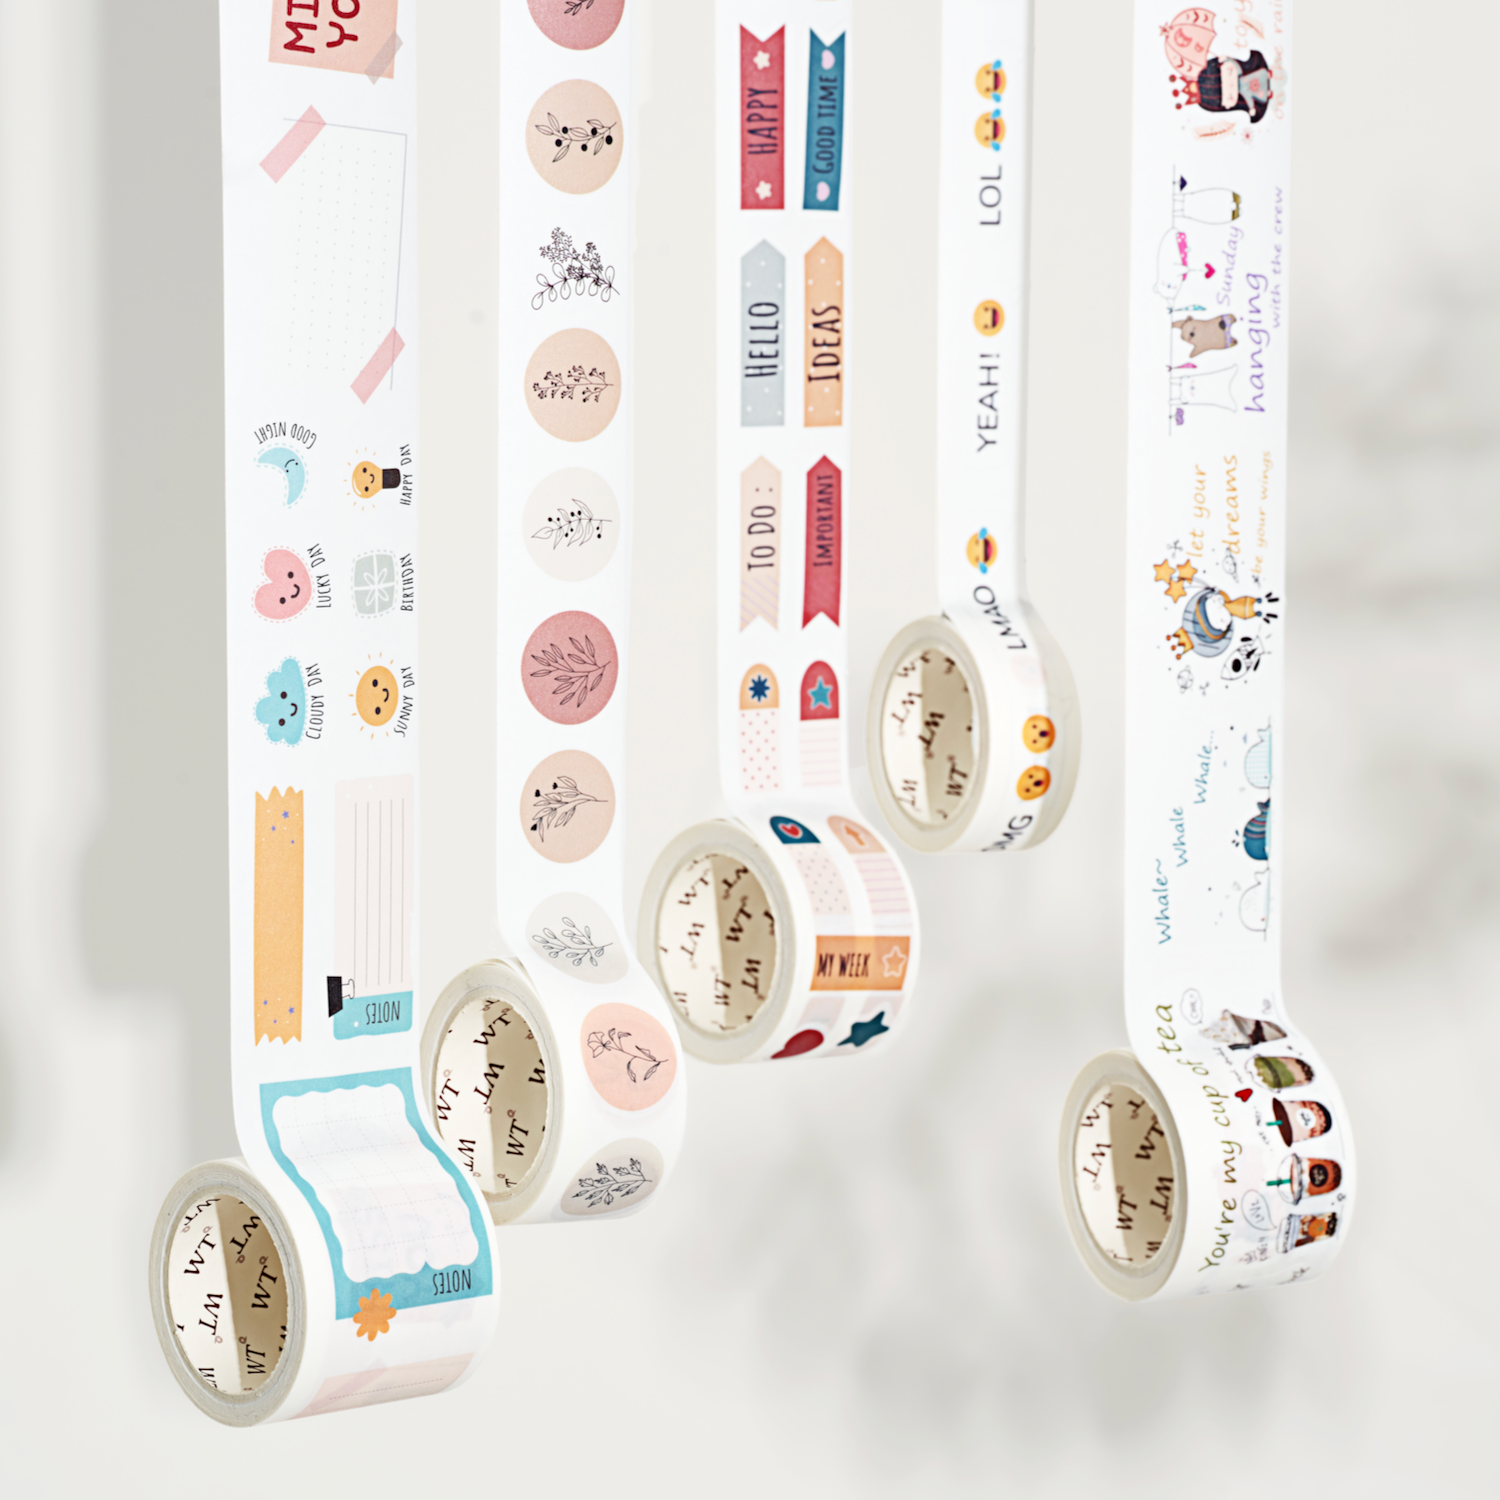 Planner&#39;s Washi Tape Sticker Set | The Washi Tape Shop. Beautiful Washi and Decorative Tape For Bullet Journals, Gift Wrapping, Planner Decoration and DIY Projects